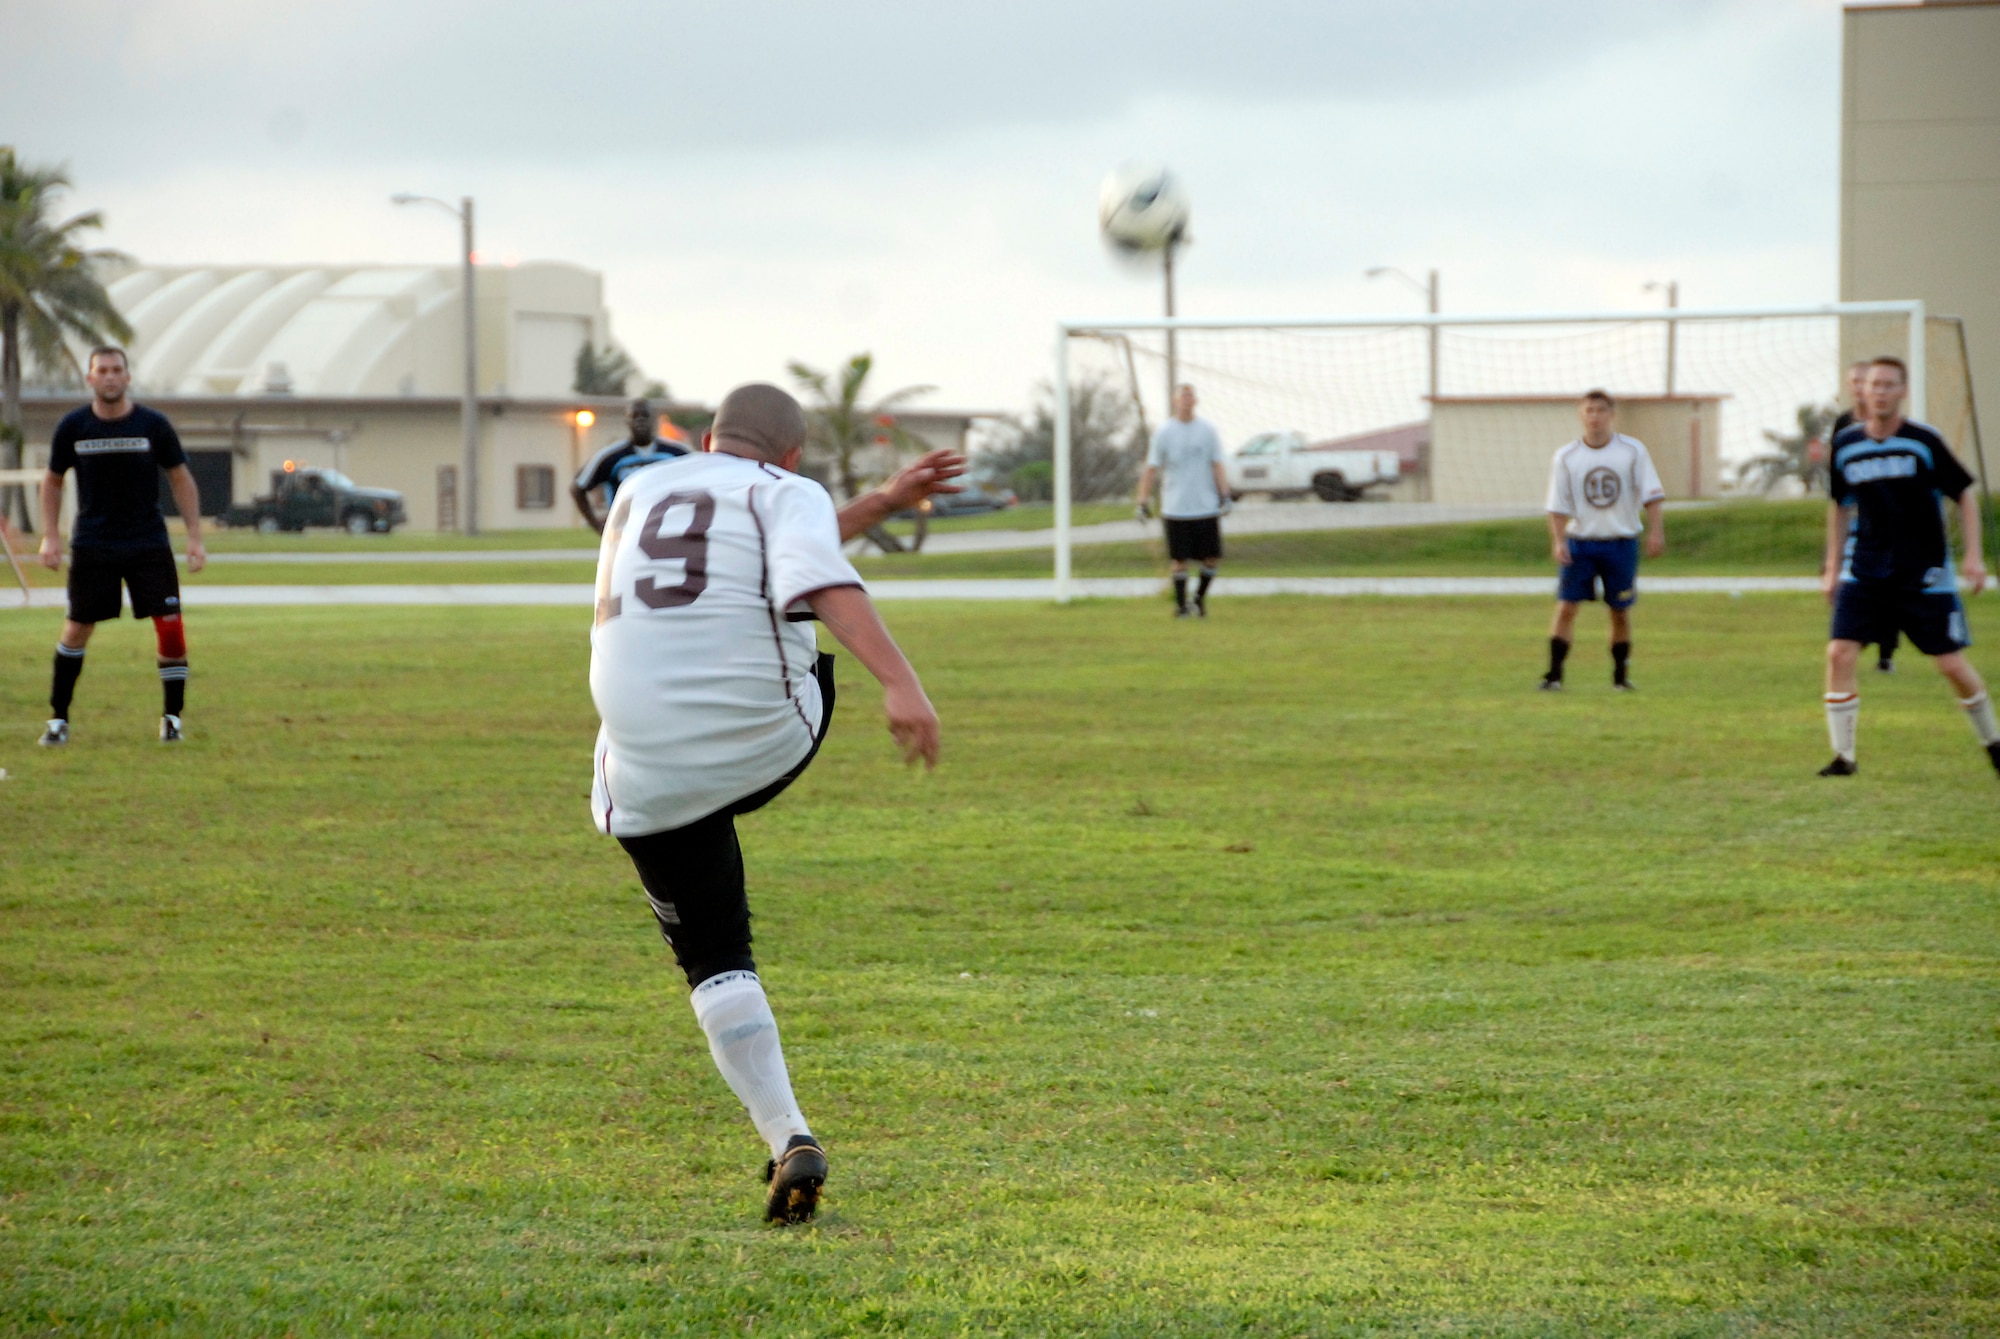 ANDERSEN AIR FORCE BASE, Guam - A Helicopter Sea Combat Squadron TWENTY-FIVE player fields a penalty kick against the 36th Communications Squadron intramural soccer team Aug. 28 at Andersen's soccer field.  HSC-25 won 4-2.  (Photo by Airman 1st Class Daniel Owen/36th Wing Public Affairs)